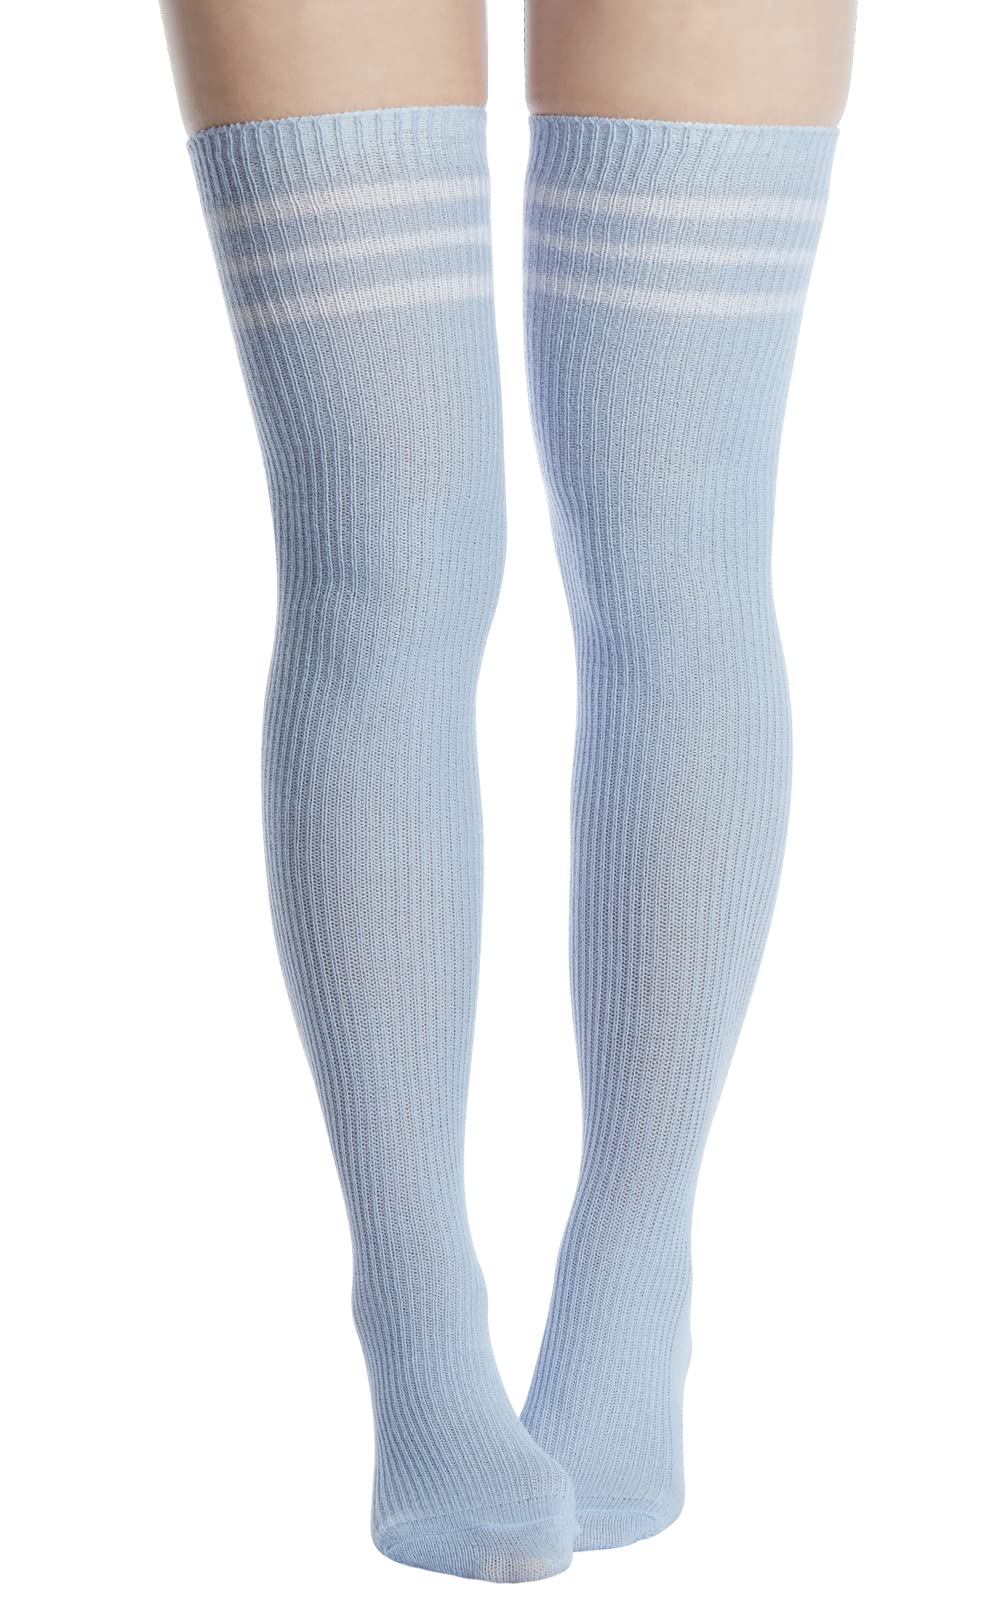 Extra Long Warm Knit Striped Thigh Highs Leg Warmers-Baby Blue & White Striped - Moon Wood